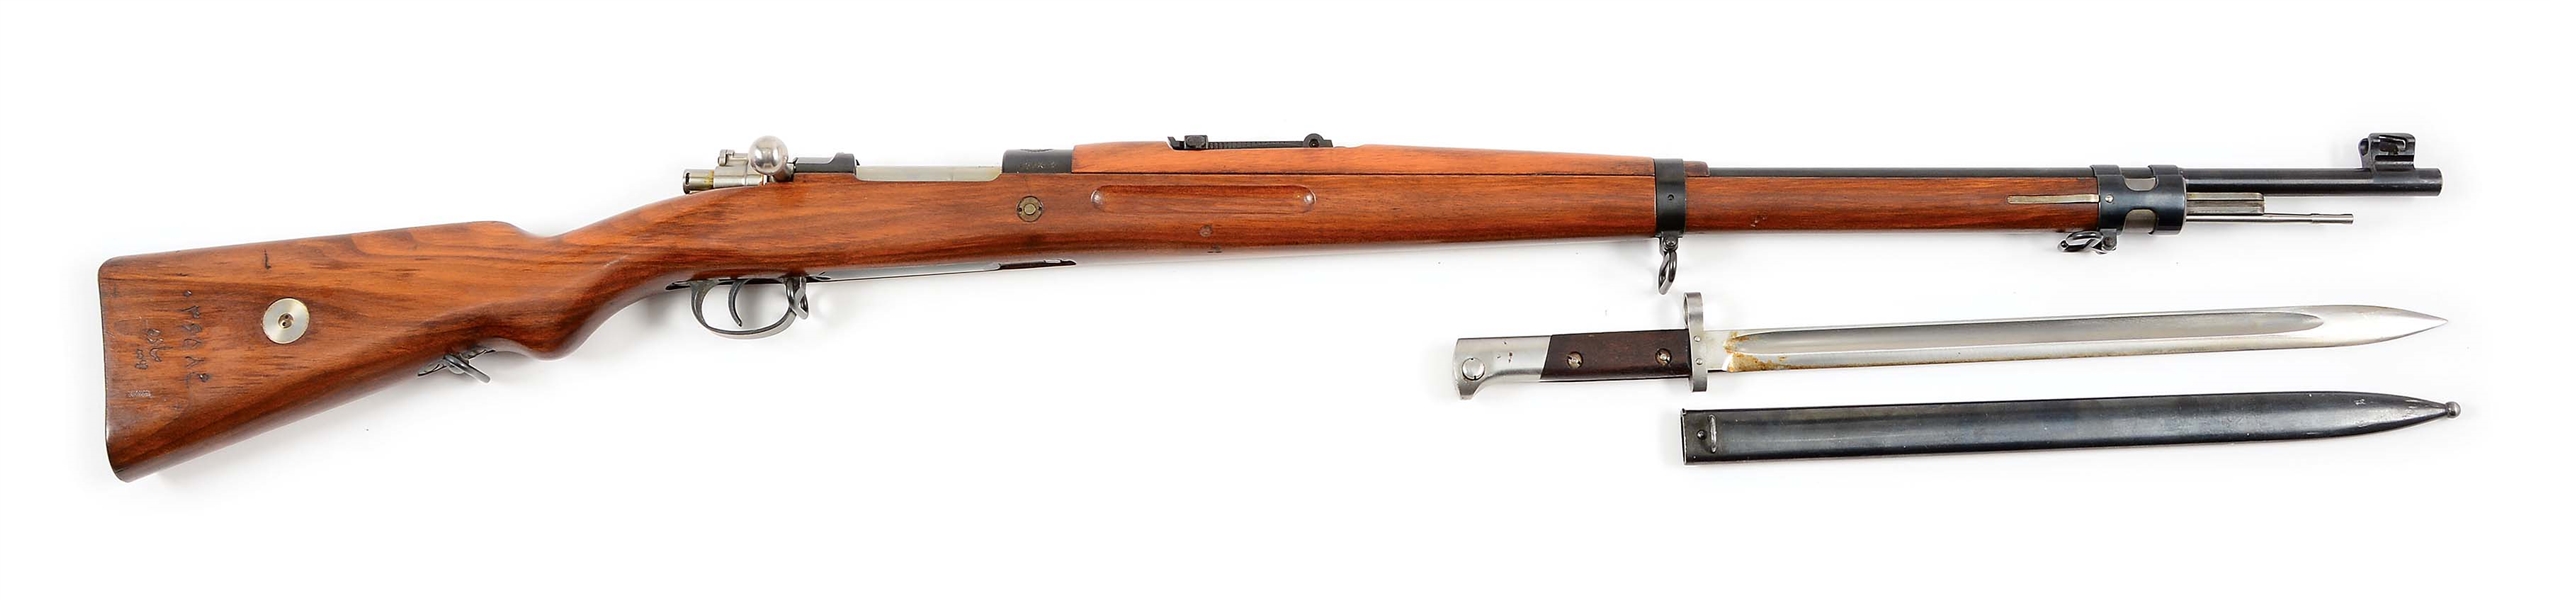 (C) PERSIAN CONTRACT BRNO MAUSER MODEL 1929 RIFLE WITH BAYONET.